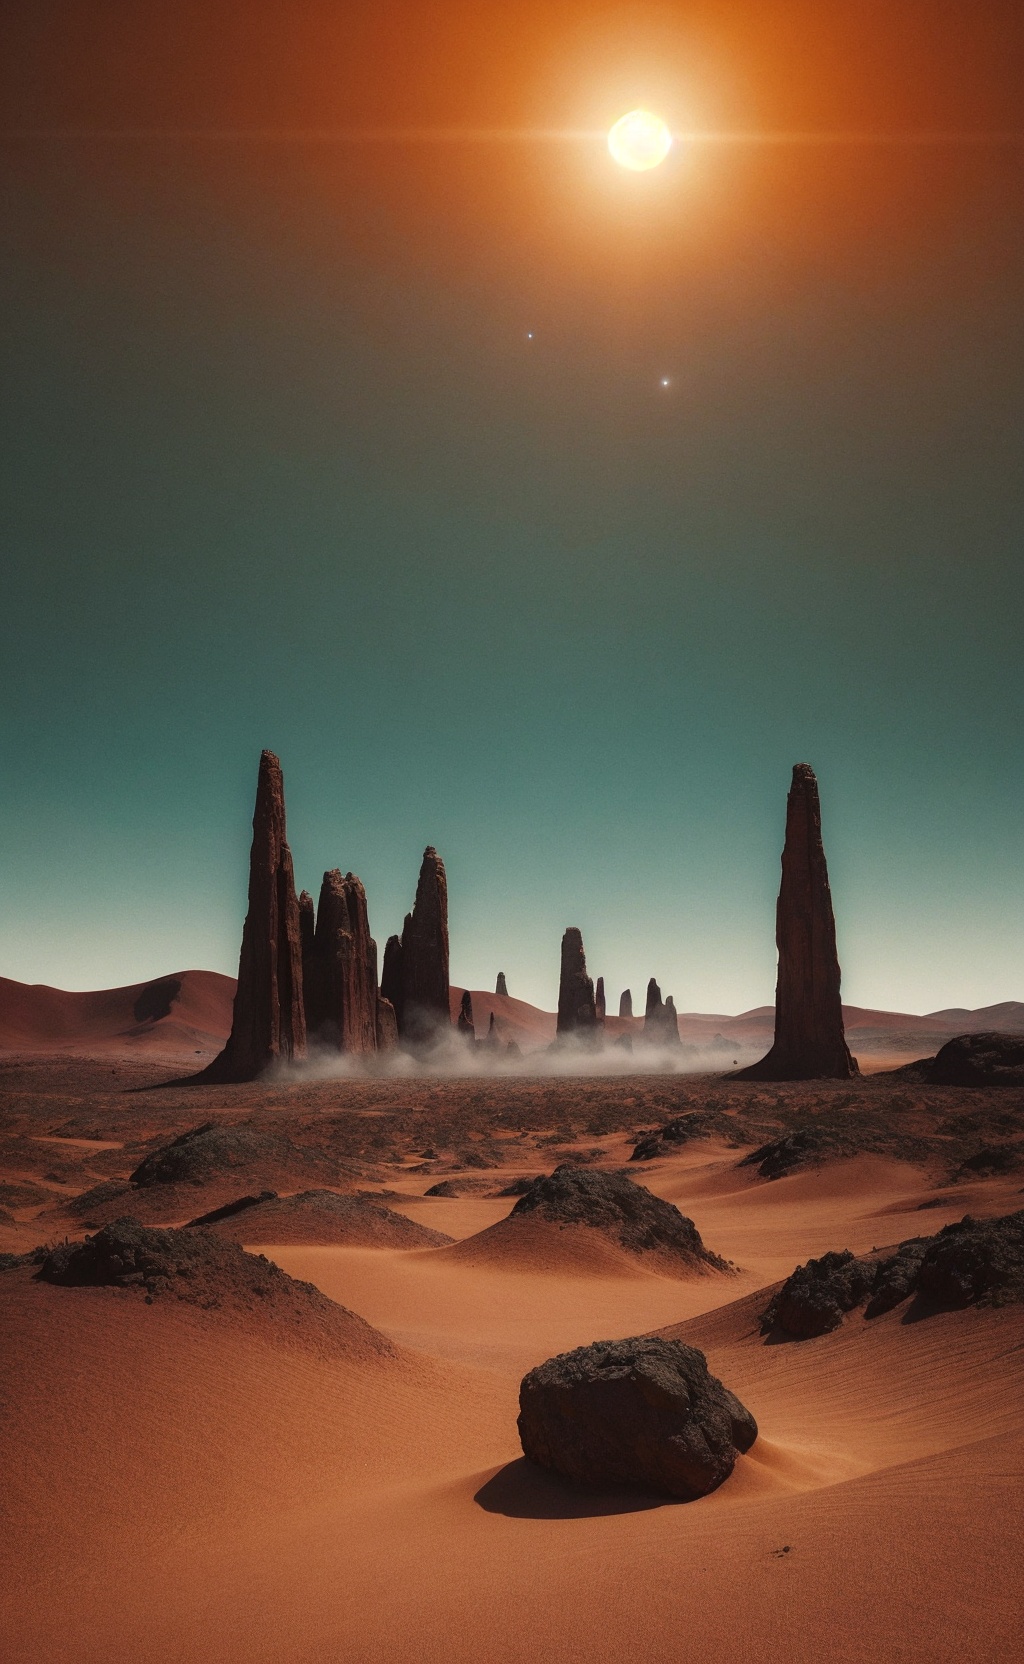 Alien desert, surreal landscape, bizarre rock formations, vivid sky, extraterrestrial plants, vivid hues, space exploration, 9:16 composition, Martian sunset, undulating dunes, peculiar shadows, towering spires, glowing crystals, swirling dust devils, unearthly beauty, remote horizon, stark contrasts, eerie tranquility